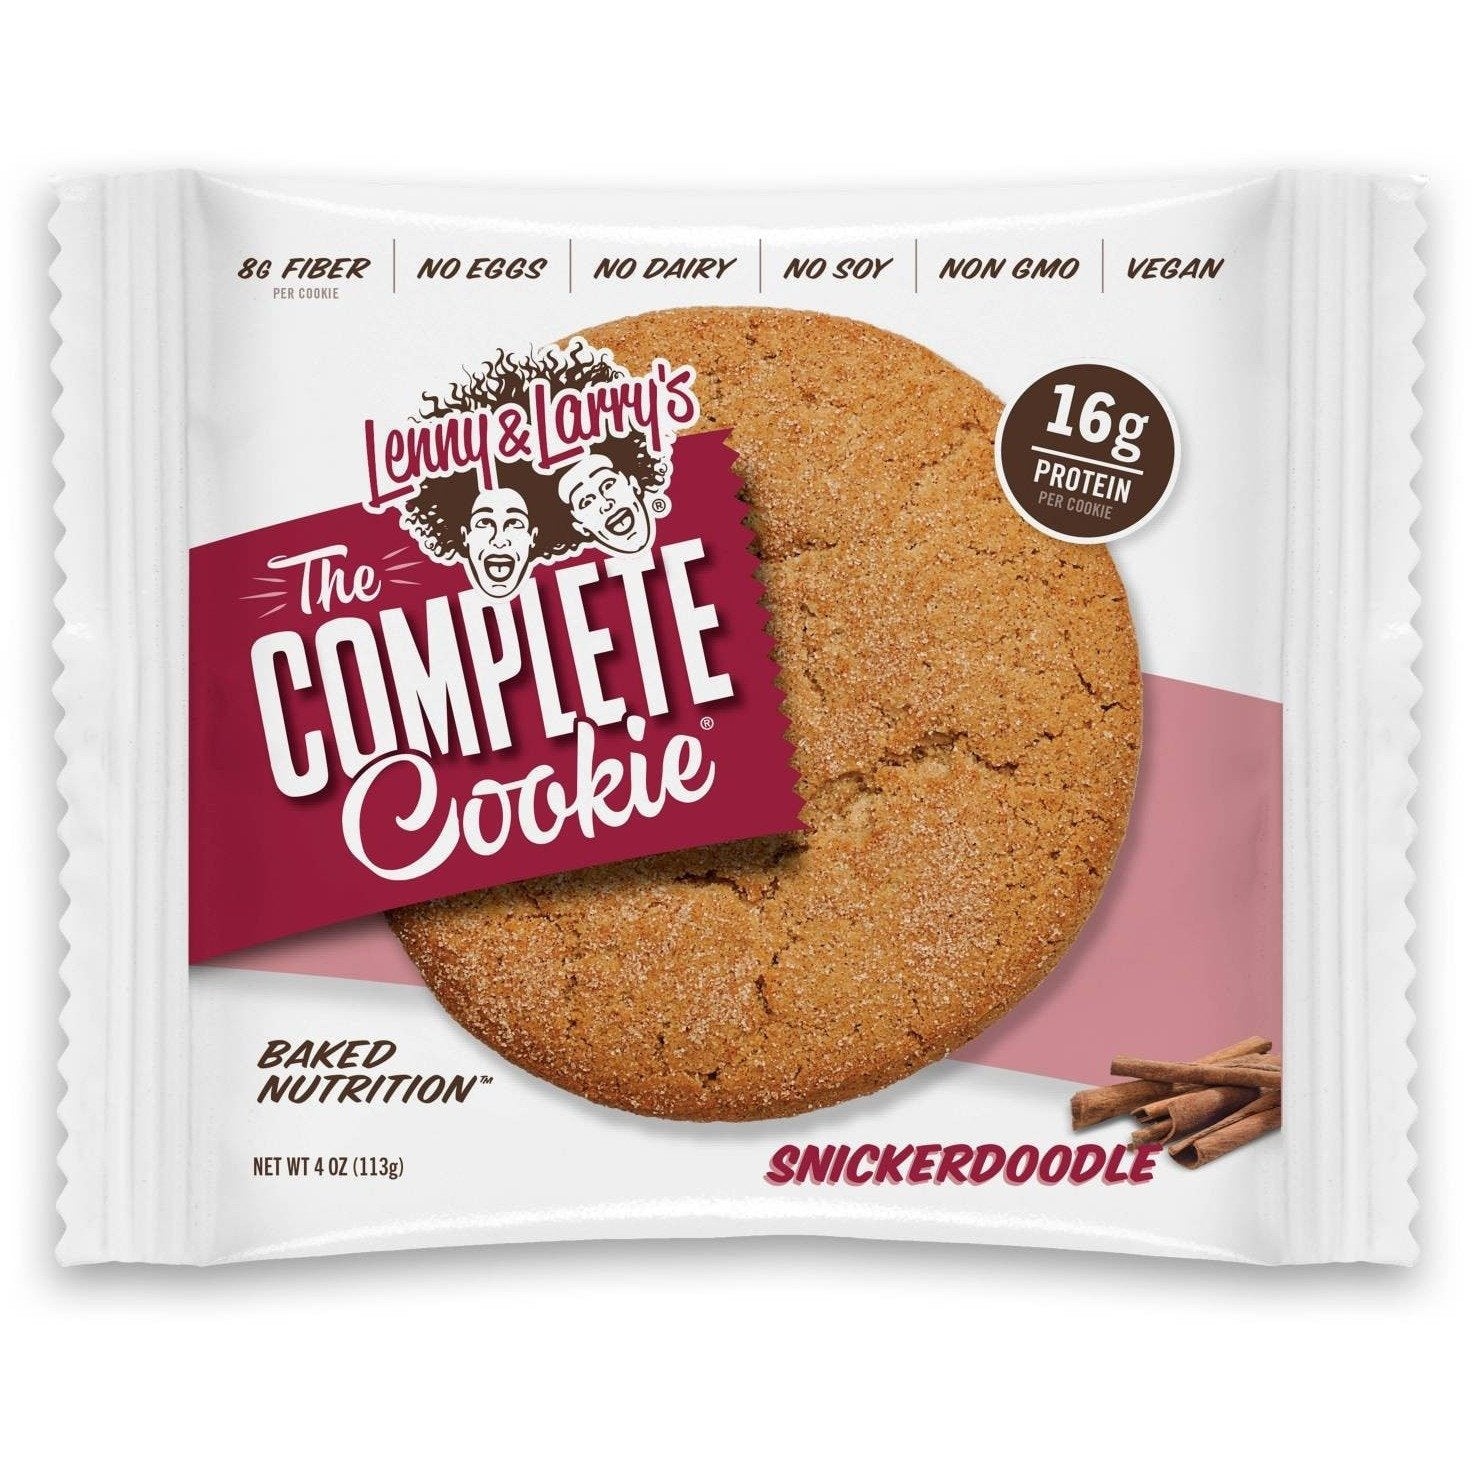 Lenny & Larry's Vegan Protein Cookie (1 cookie) Protein Snacks Snickerdoodle Lenny & Larry lenny-larrys-protein-cookie-1-cookie